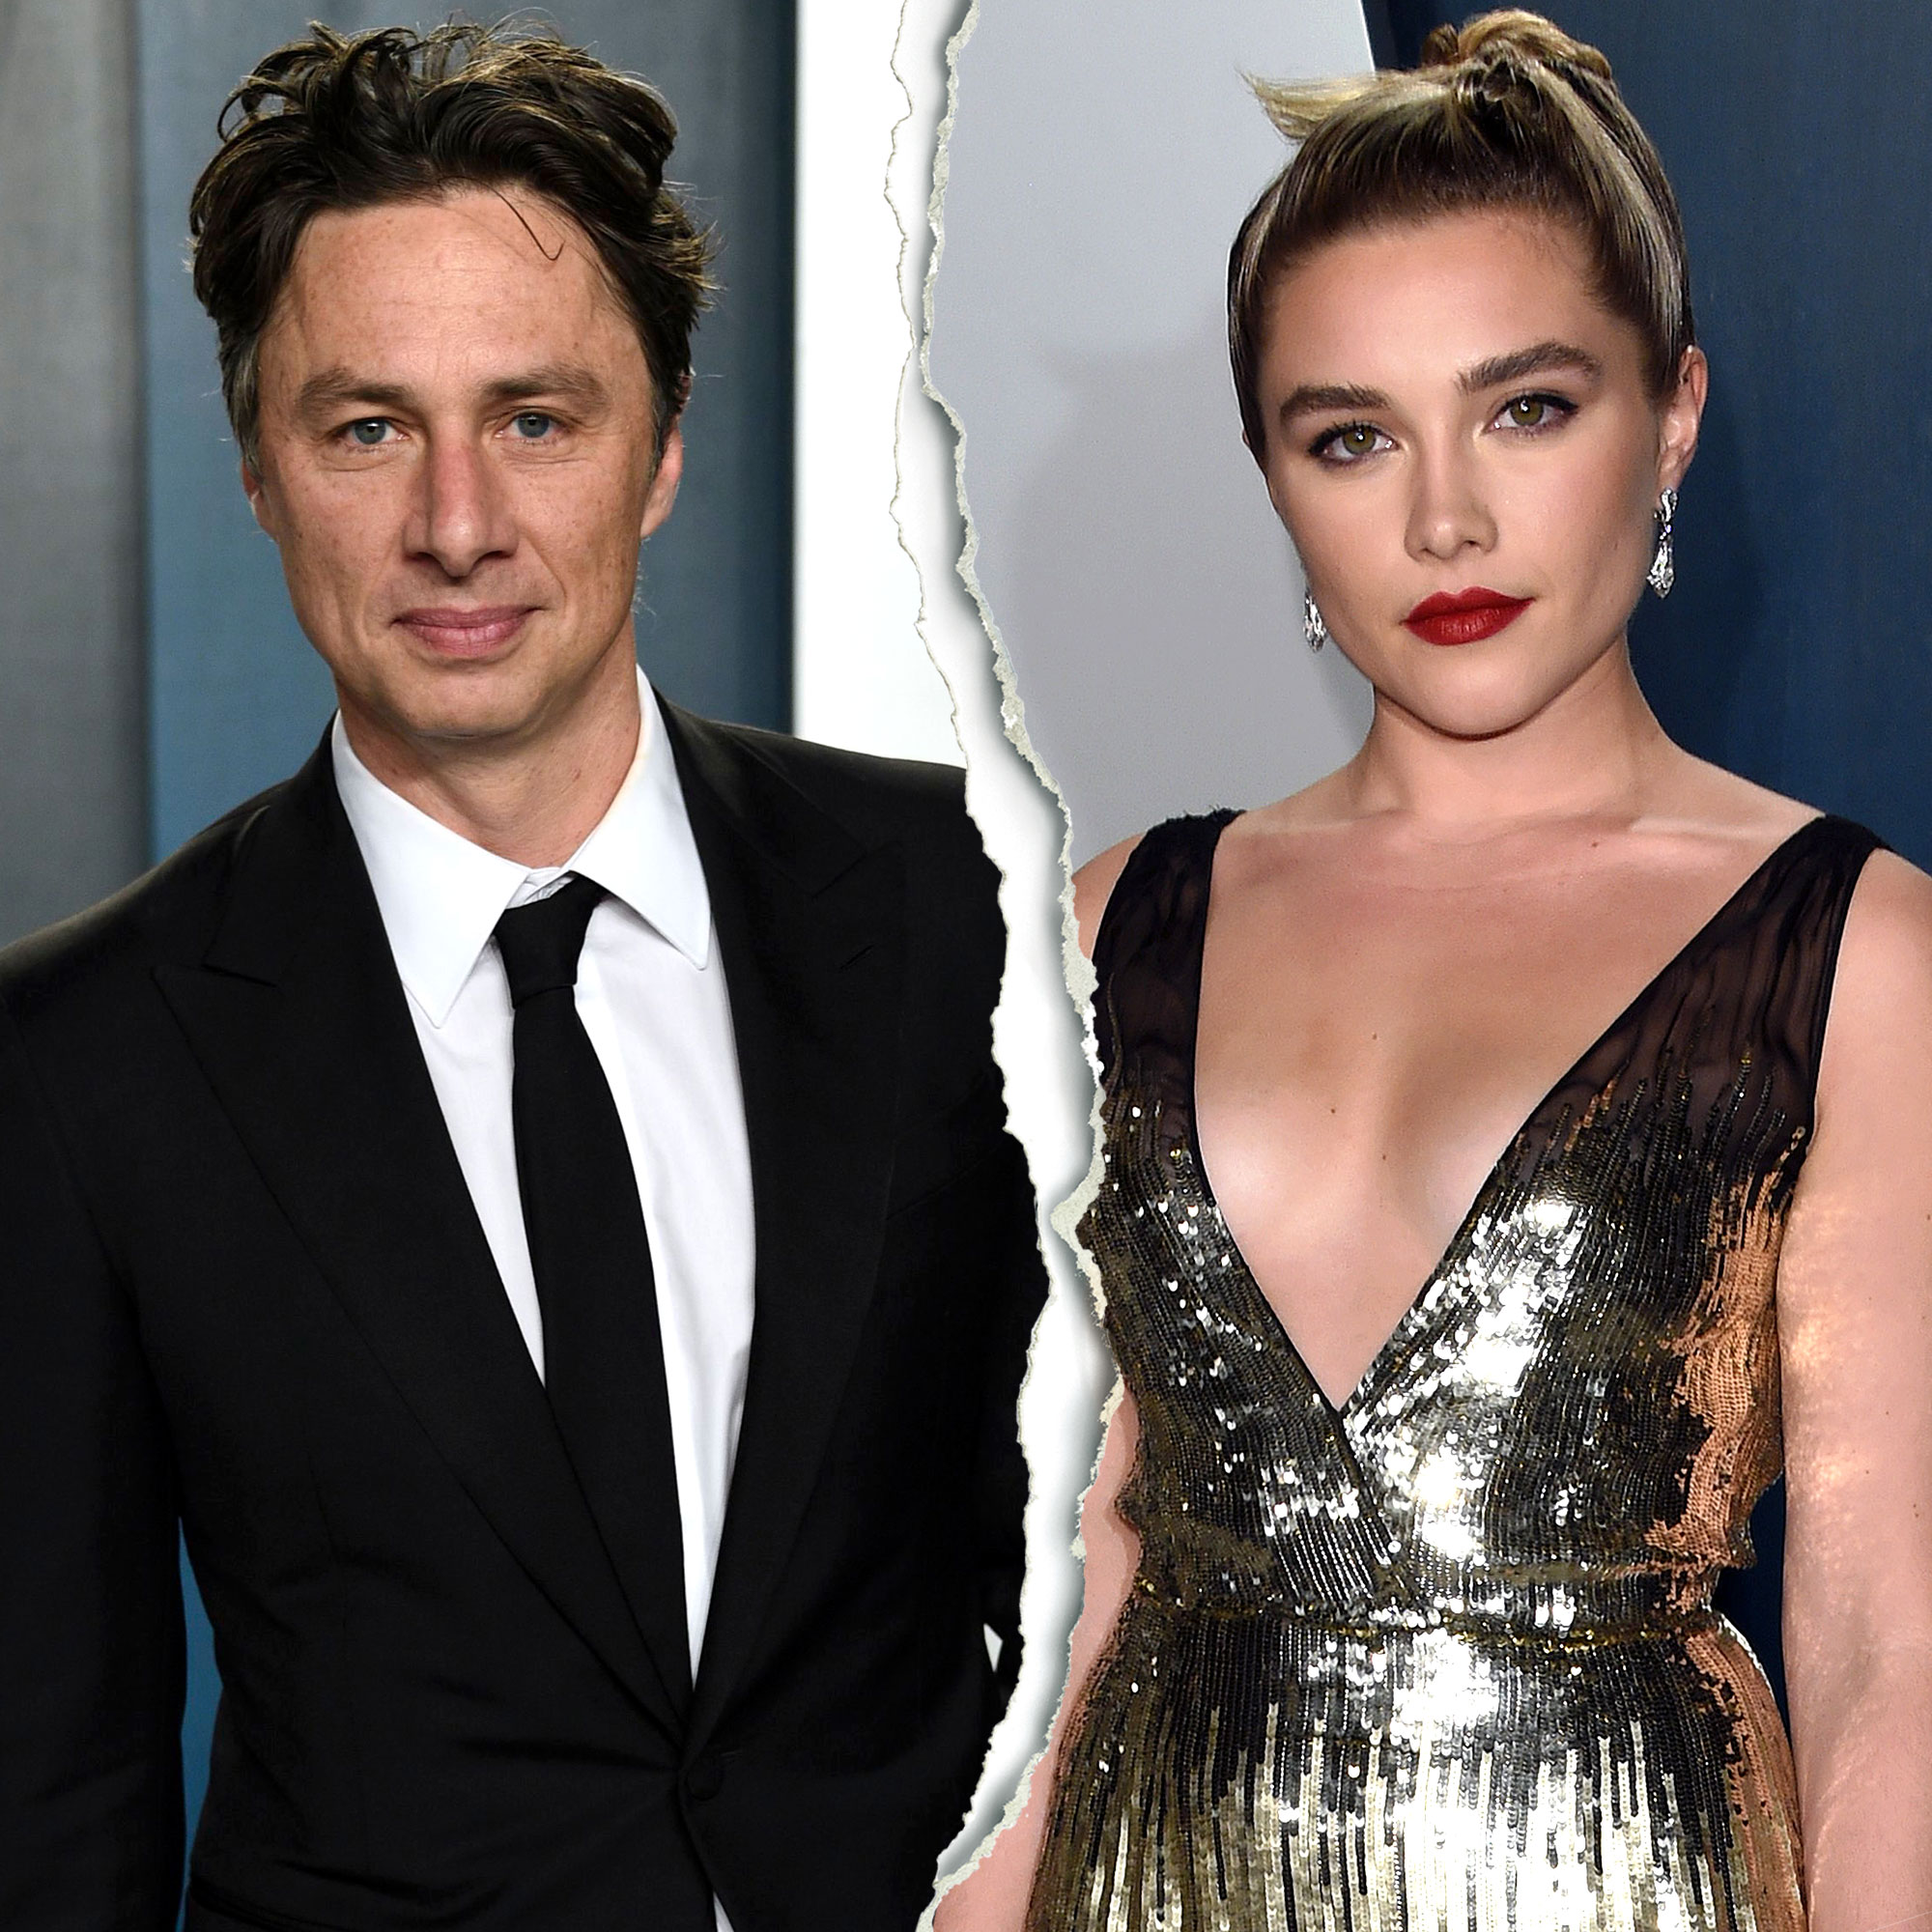 Florence Pugh, Zach Braff Split After 3 Years of Dating